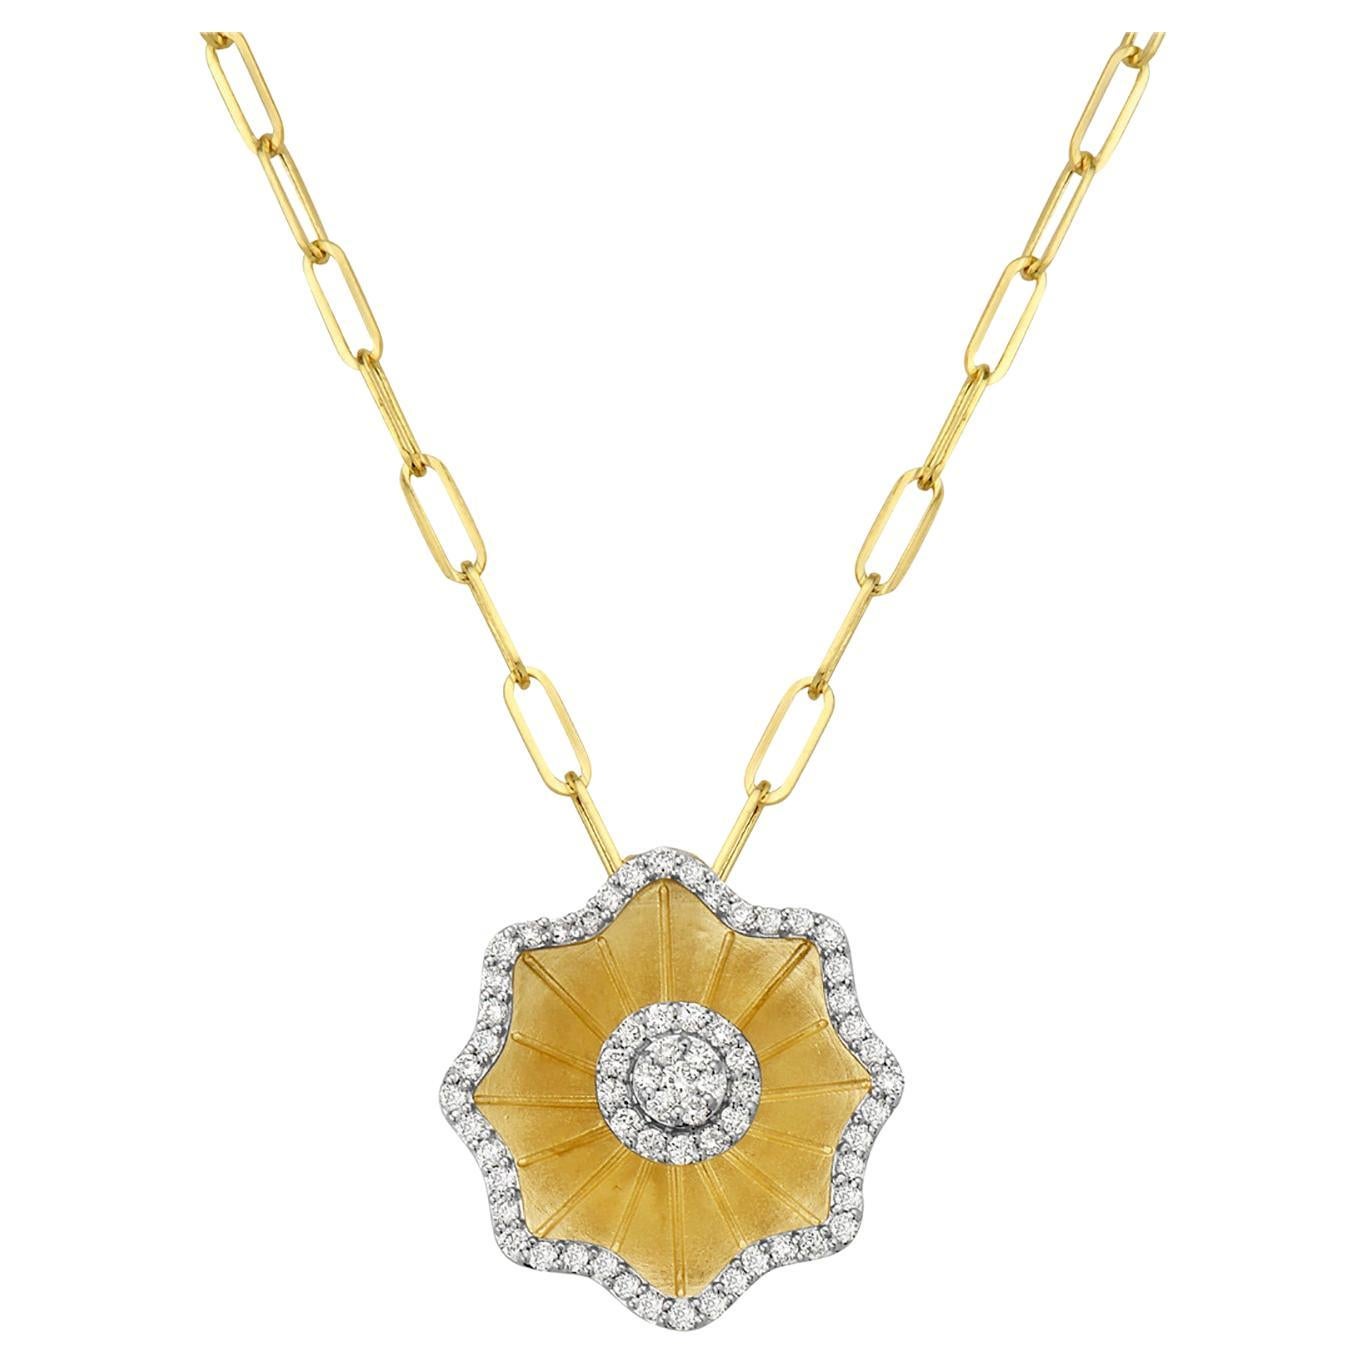 Carved Flowery Pendant with Pave Halo Diamonds Made in 14k Yellow Gold